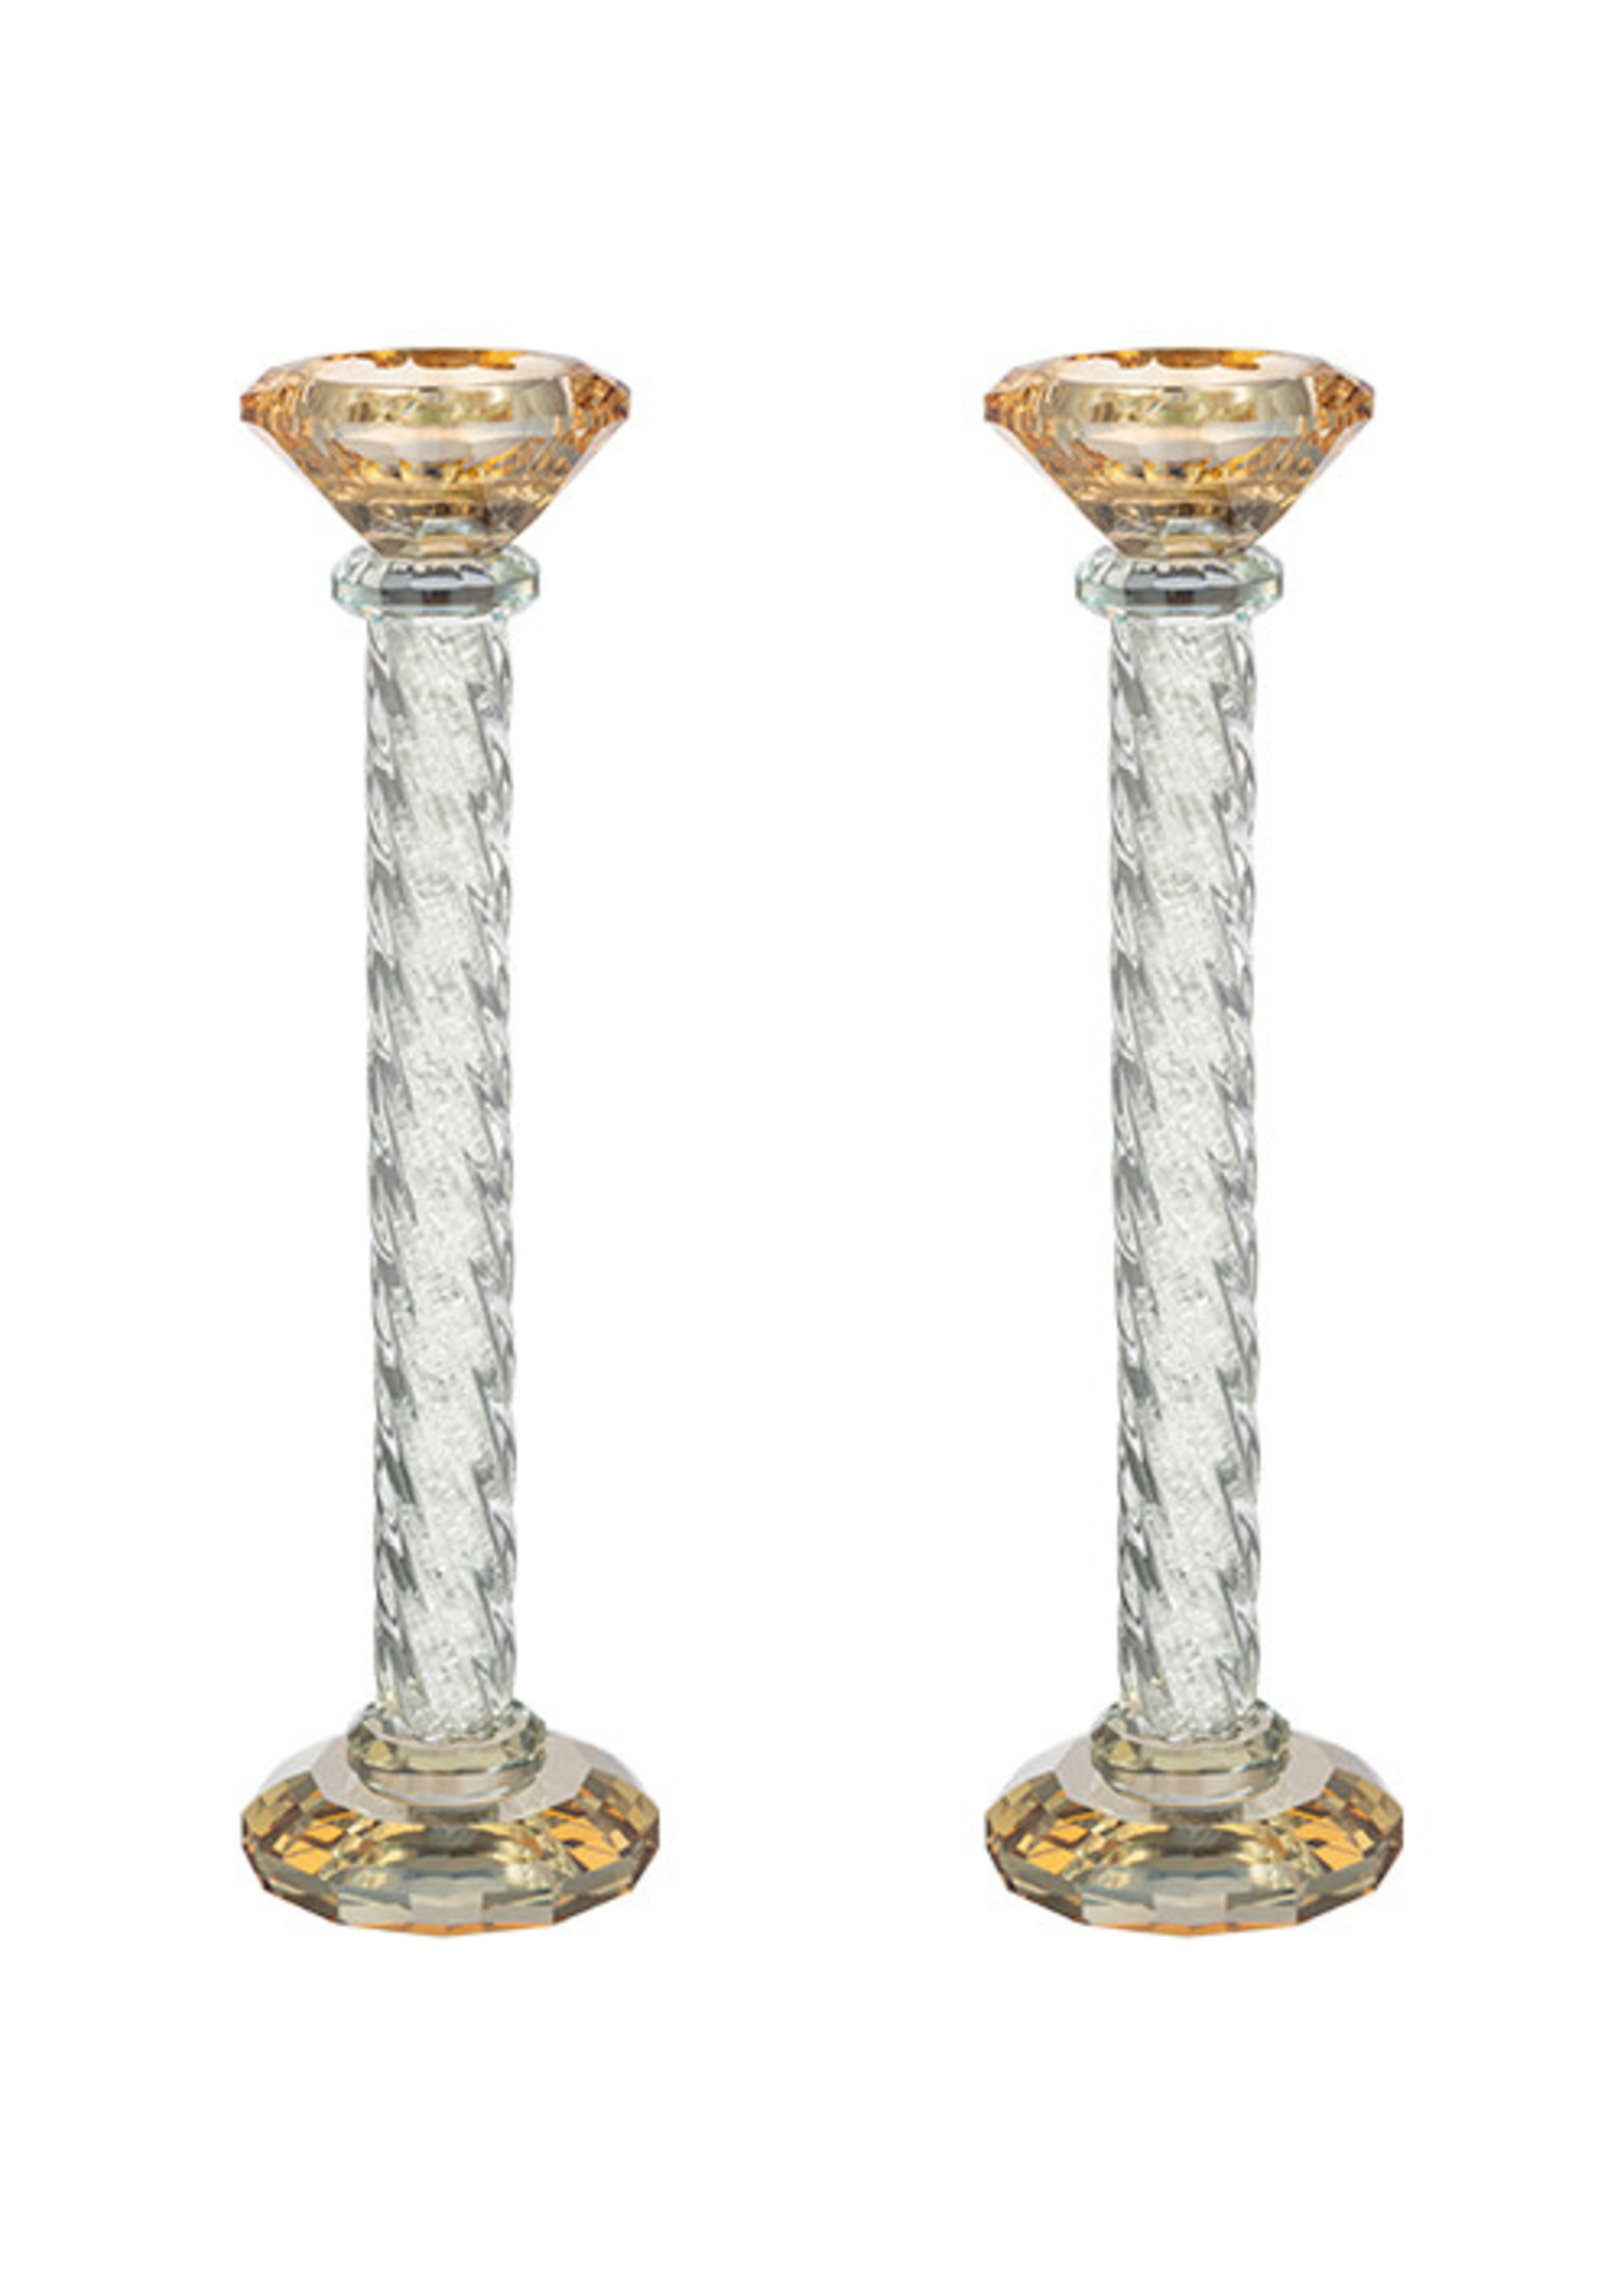 CRYSTAL CANDLESTICKS  GOLD COLOR TOP WITH CLEAR CHIPS- 25.5CM